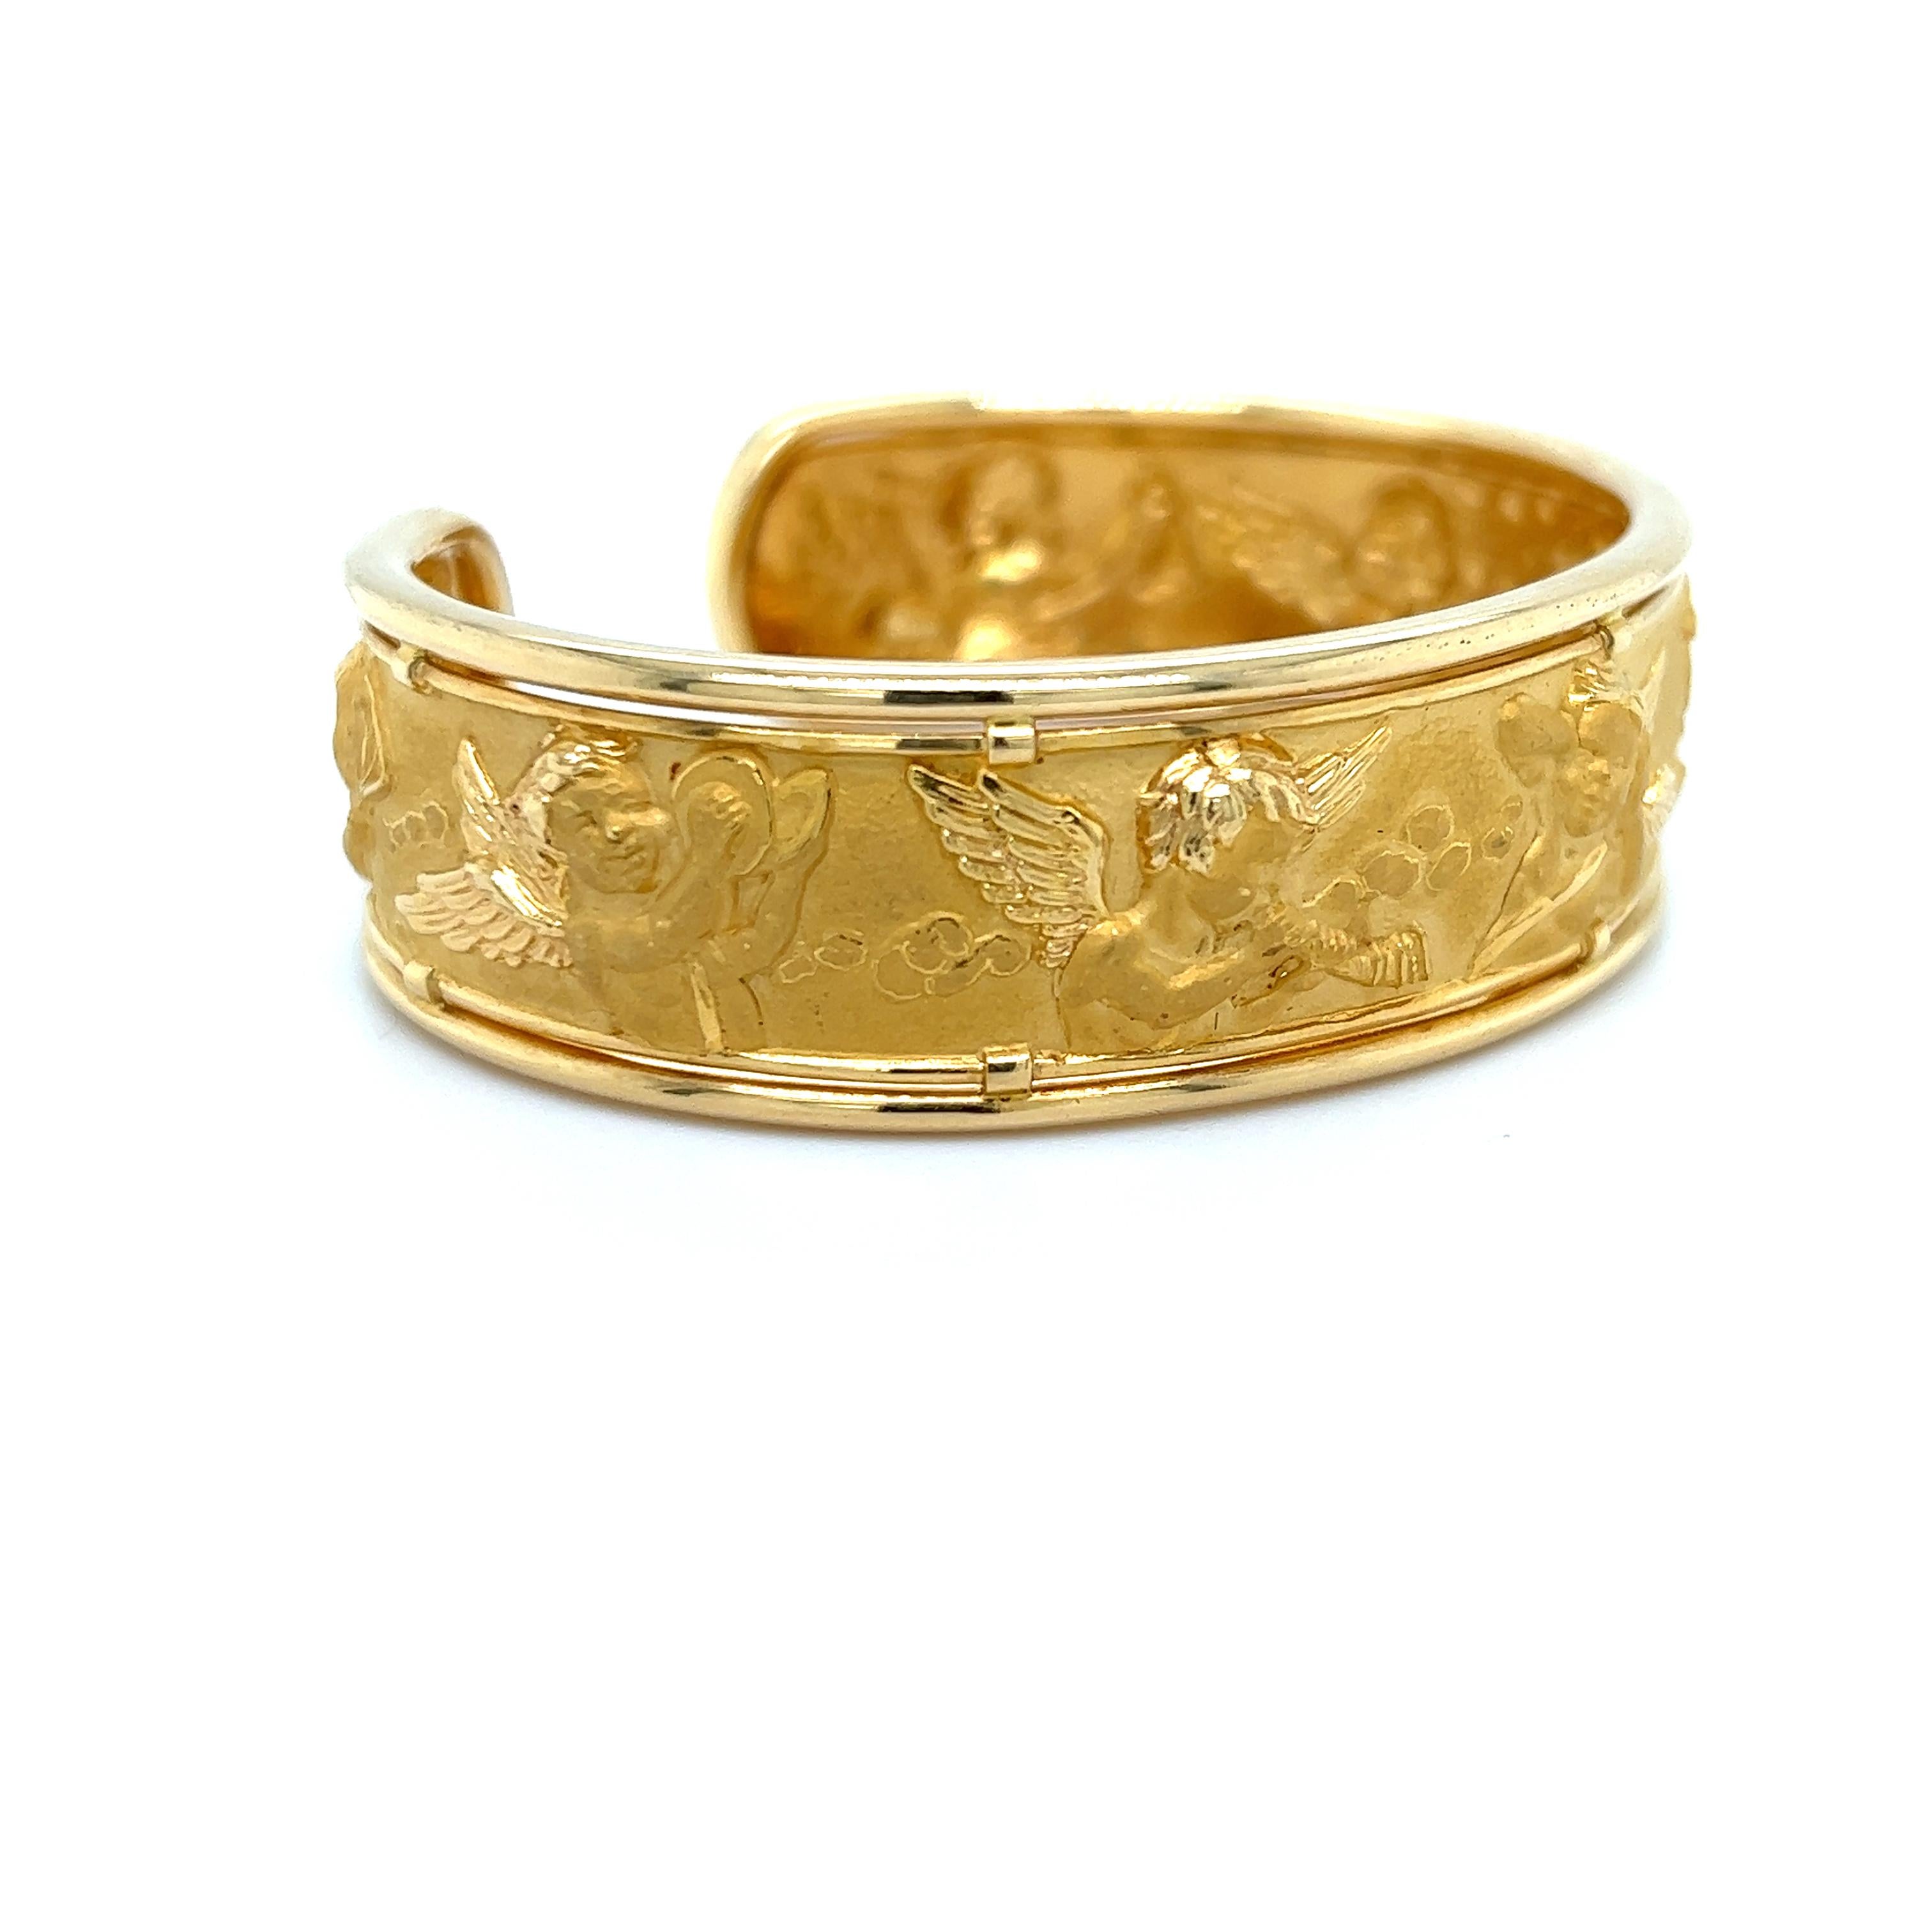 Beautiful piece of art crafted by famed designer Carrera Y Carrera. This cuff bracelet is crafted in 22k & 18k yellow gold and depicts cherubs happily playing instruments in a heavenly back ground.
As most of Carrera Y Carrera pieces, this cuff